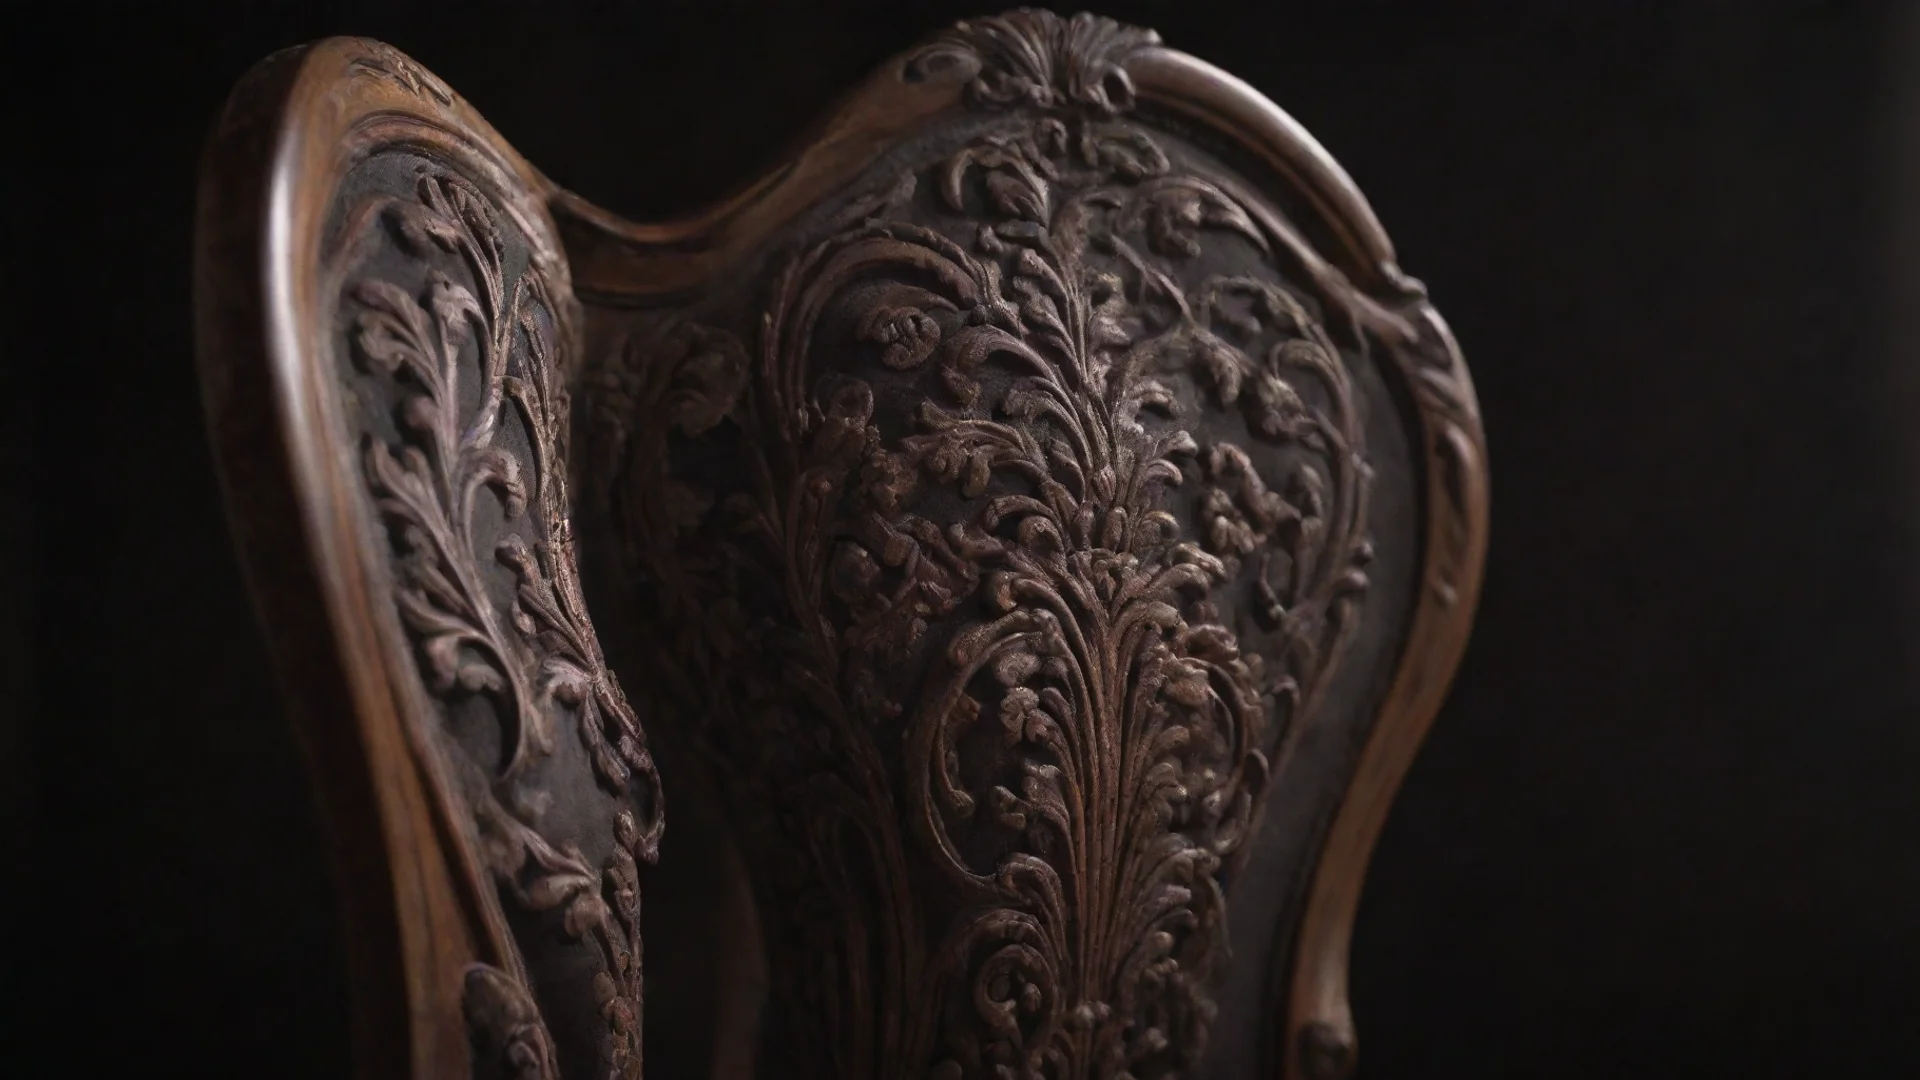 artstation art detail view of an ornate chair back dark brown at the edge blurred with high craftsmanship and dark background confident engaging wow 3 hdwidescreen